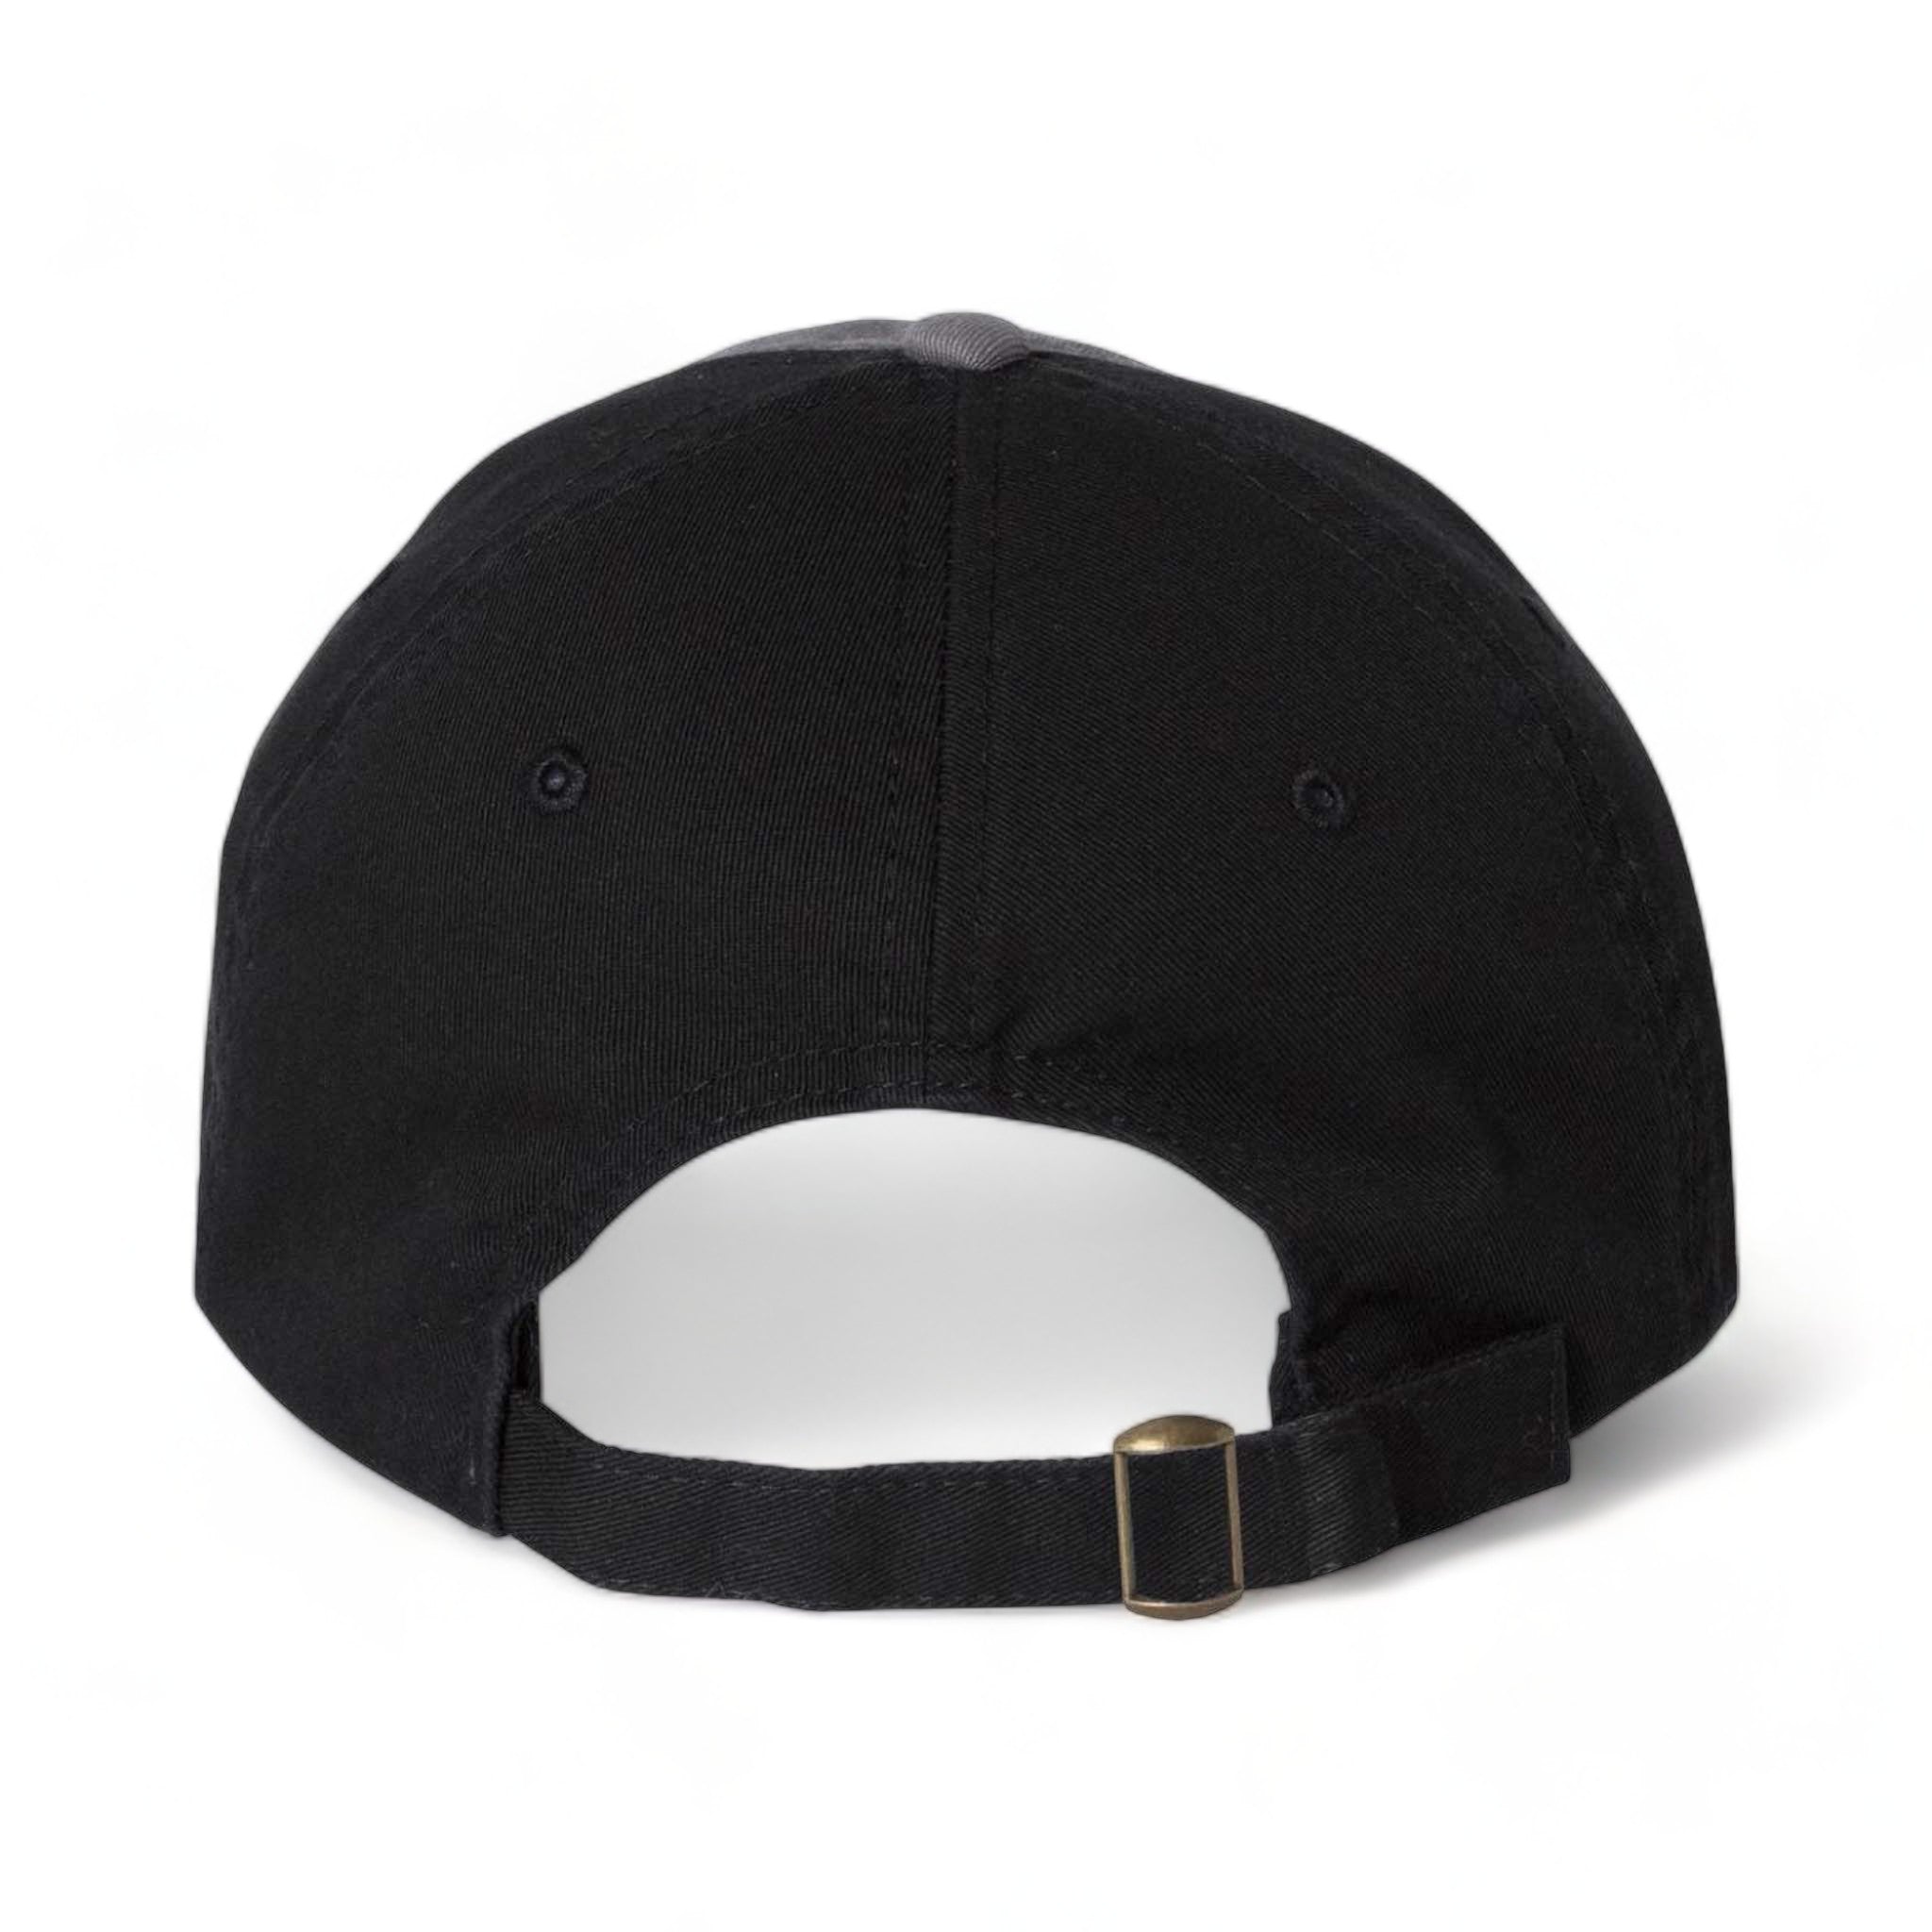 Back view of Valucap VC300A custom hat in charcoal and black